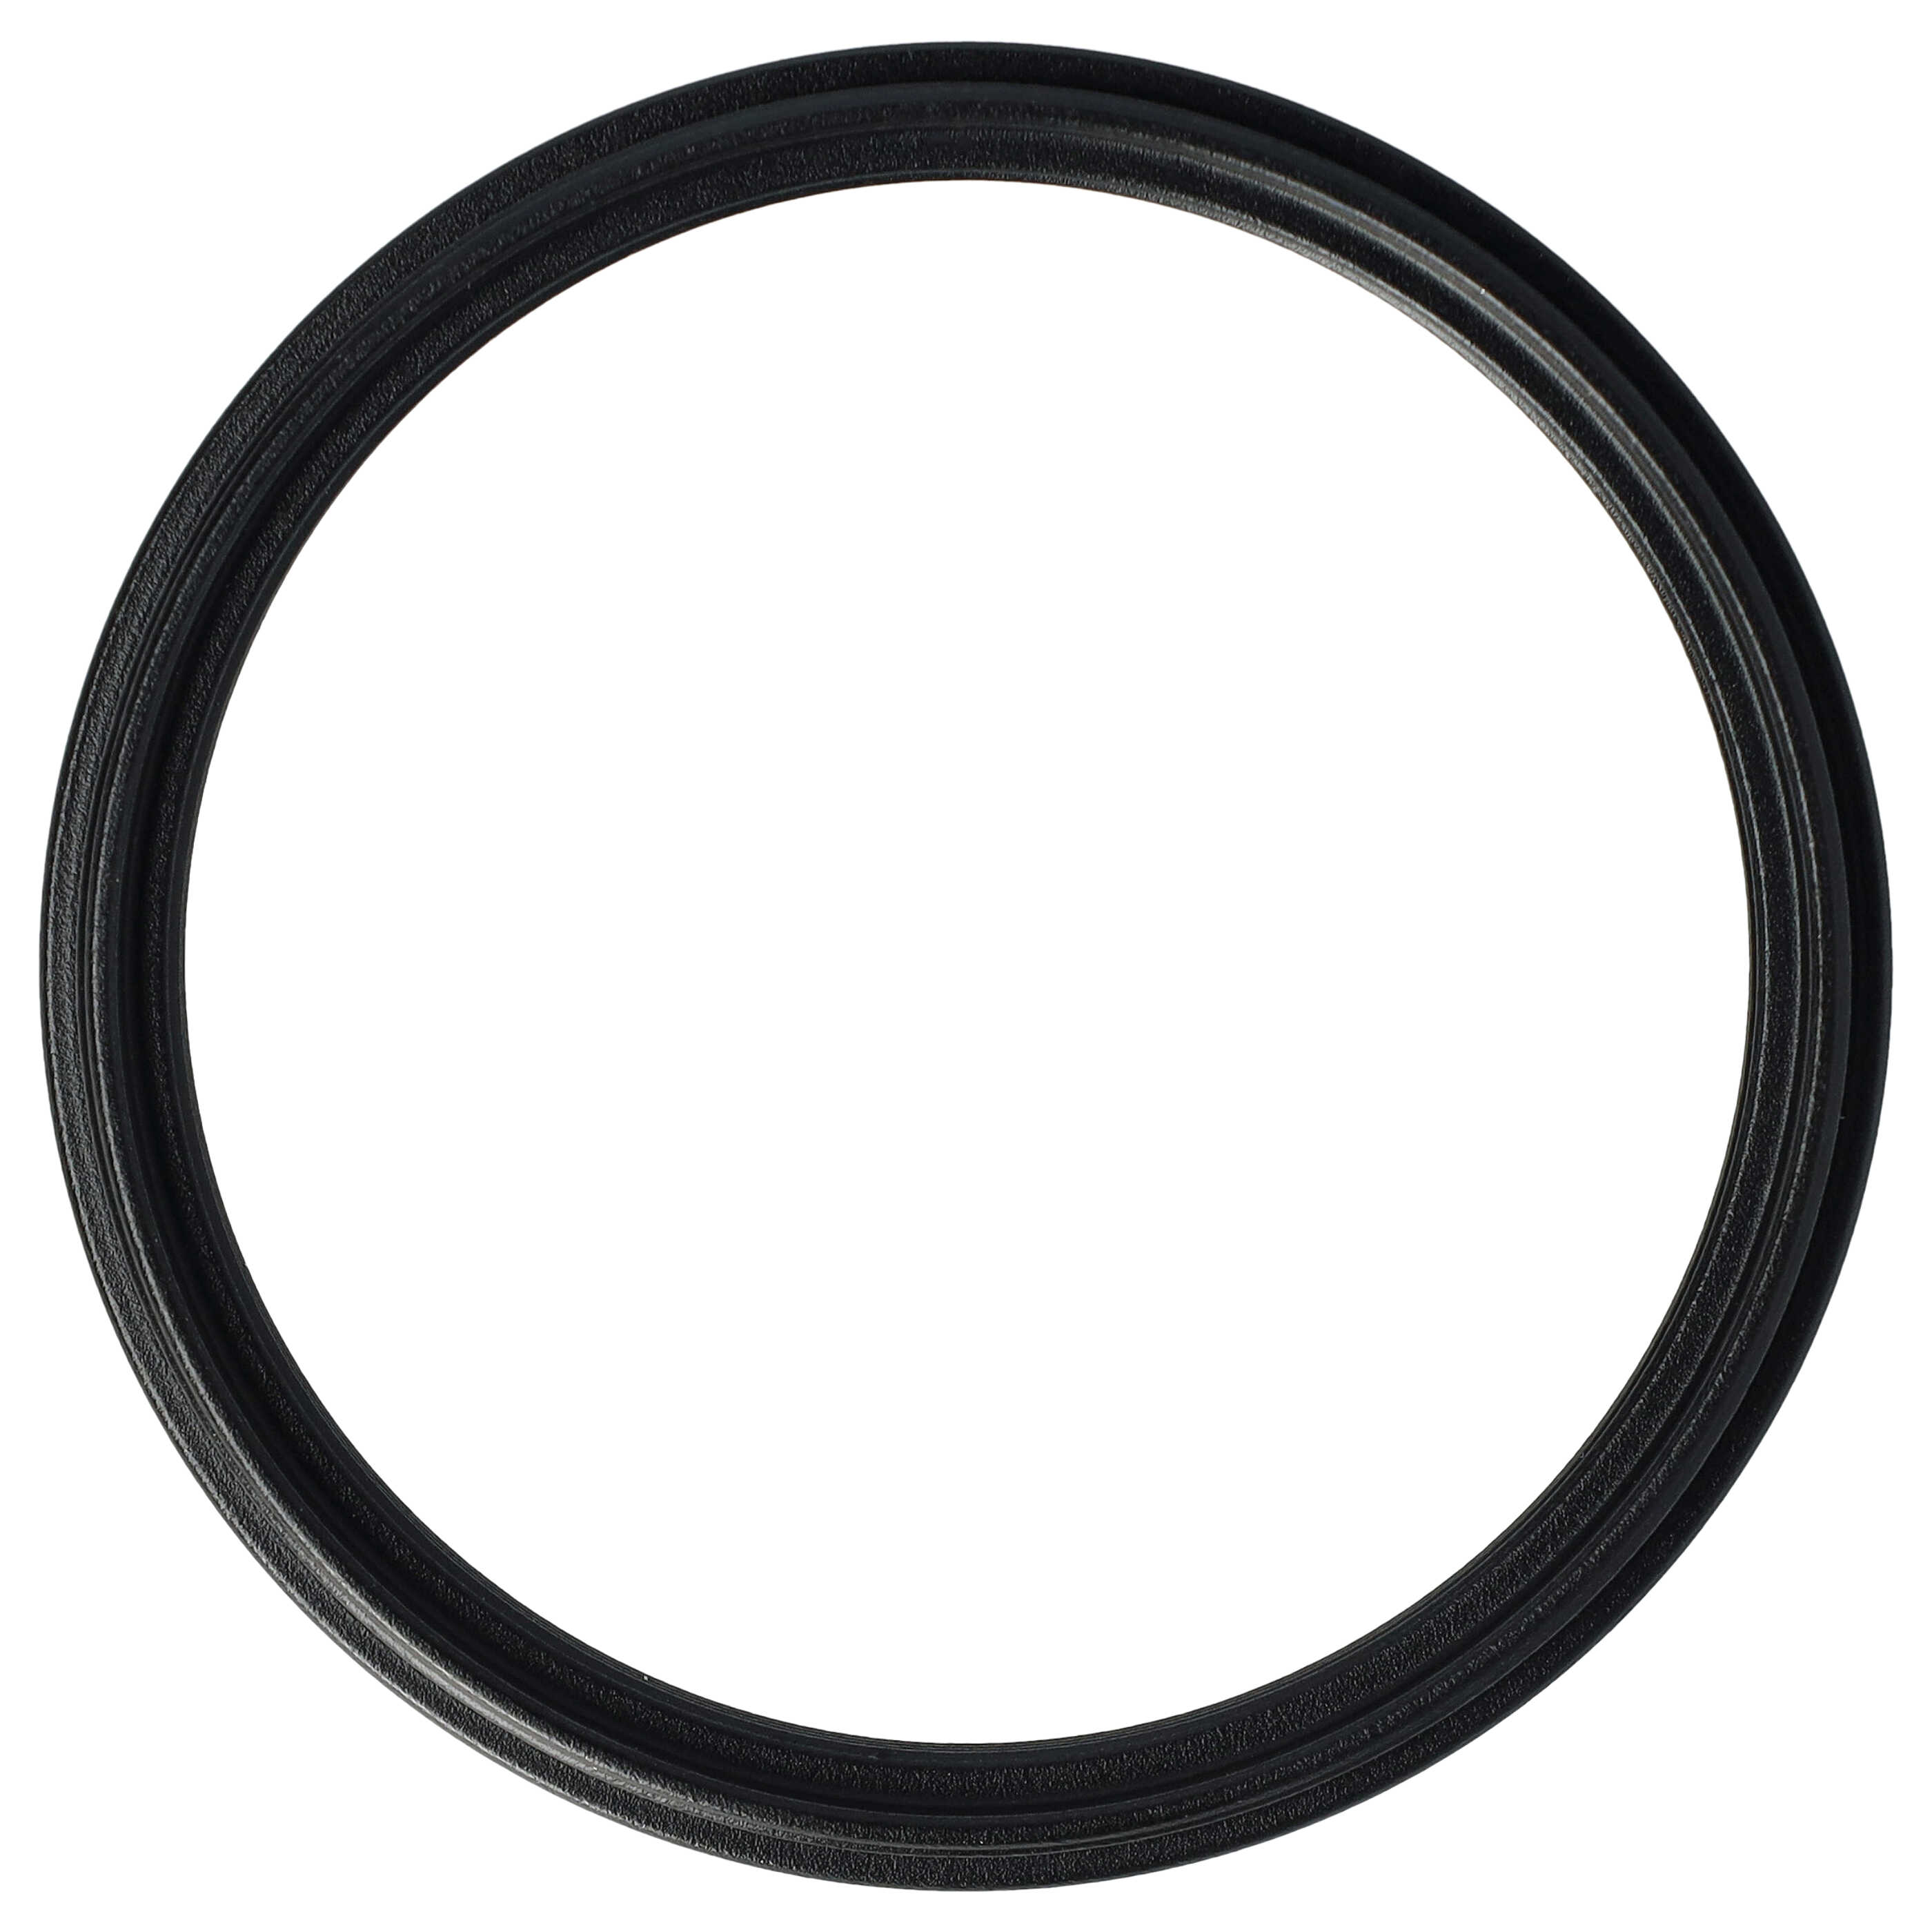 Step-Down Ring Adapter from 58 mm to 52 mm suitable for Camera Lens - Filter Adapter, metal